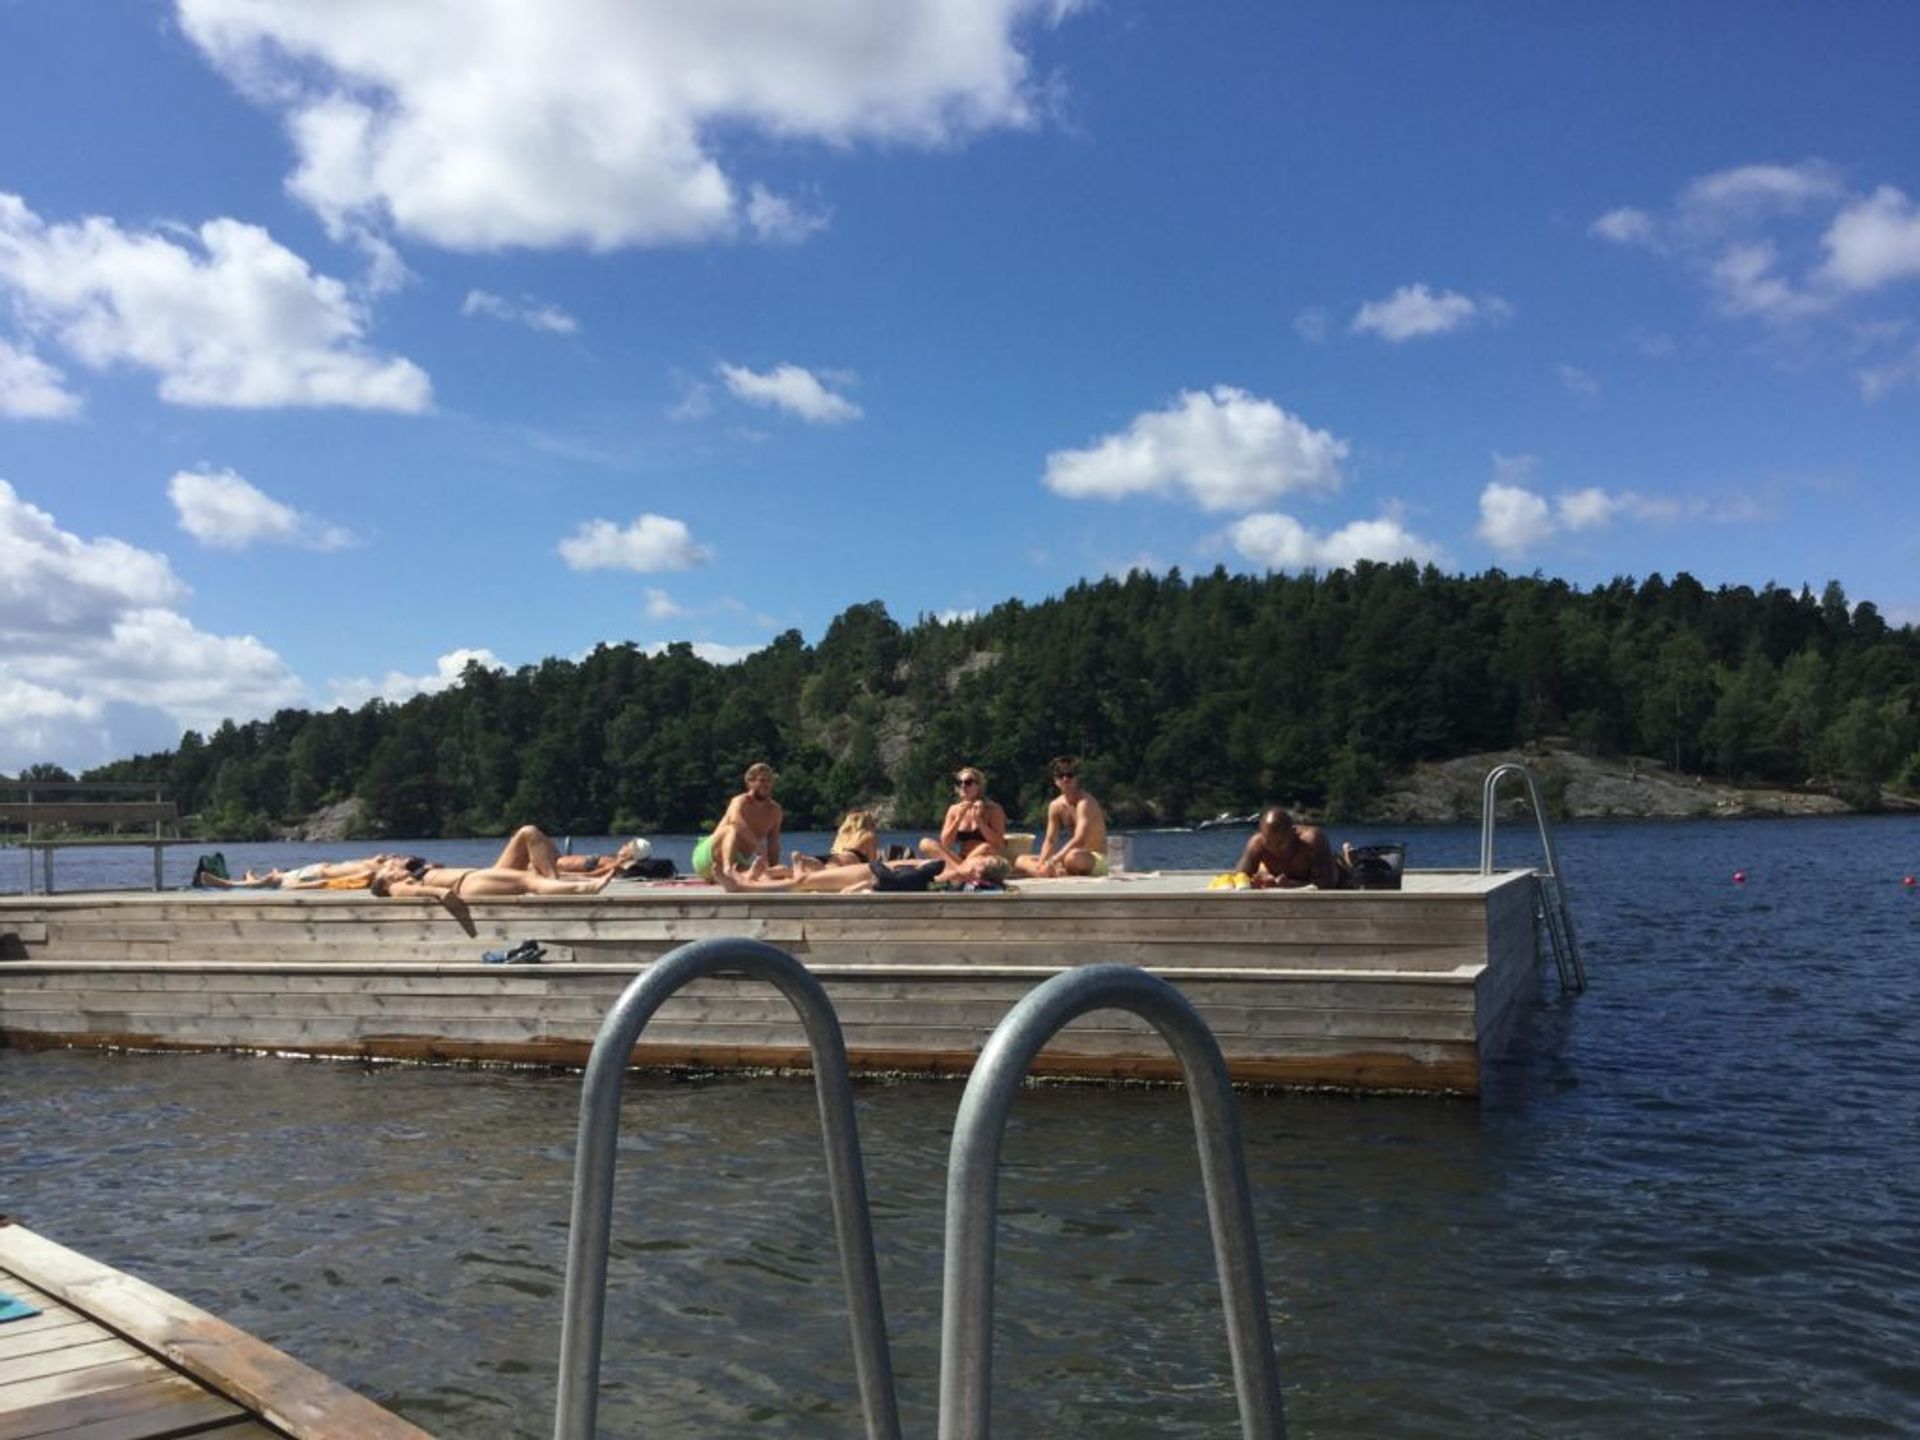 Water and decking on the archipelago of Stockholm